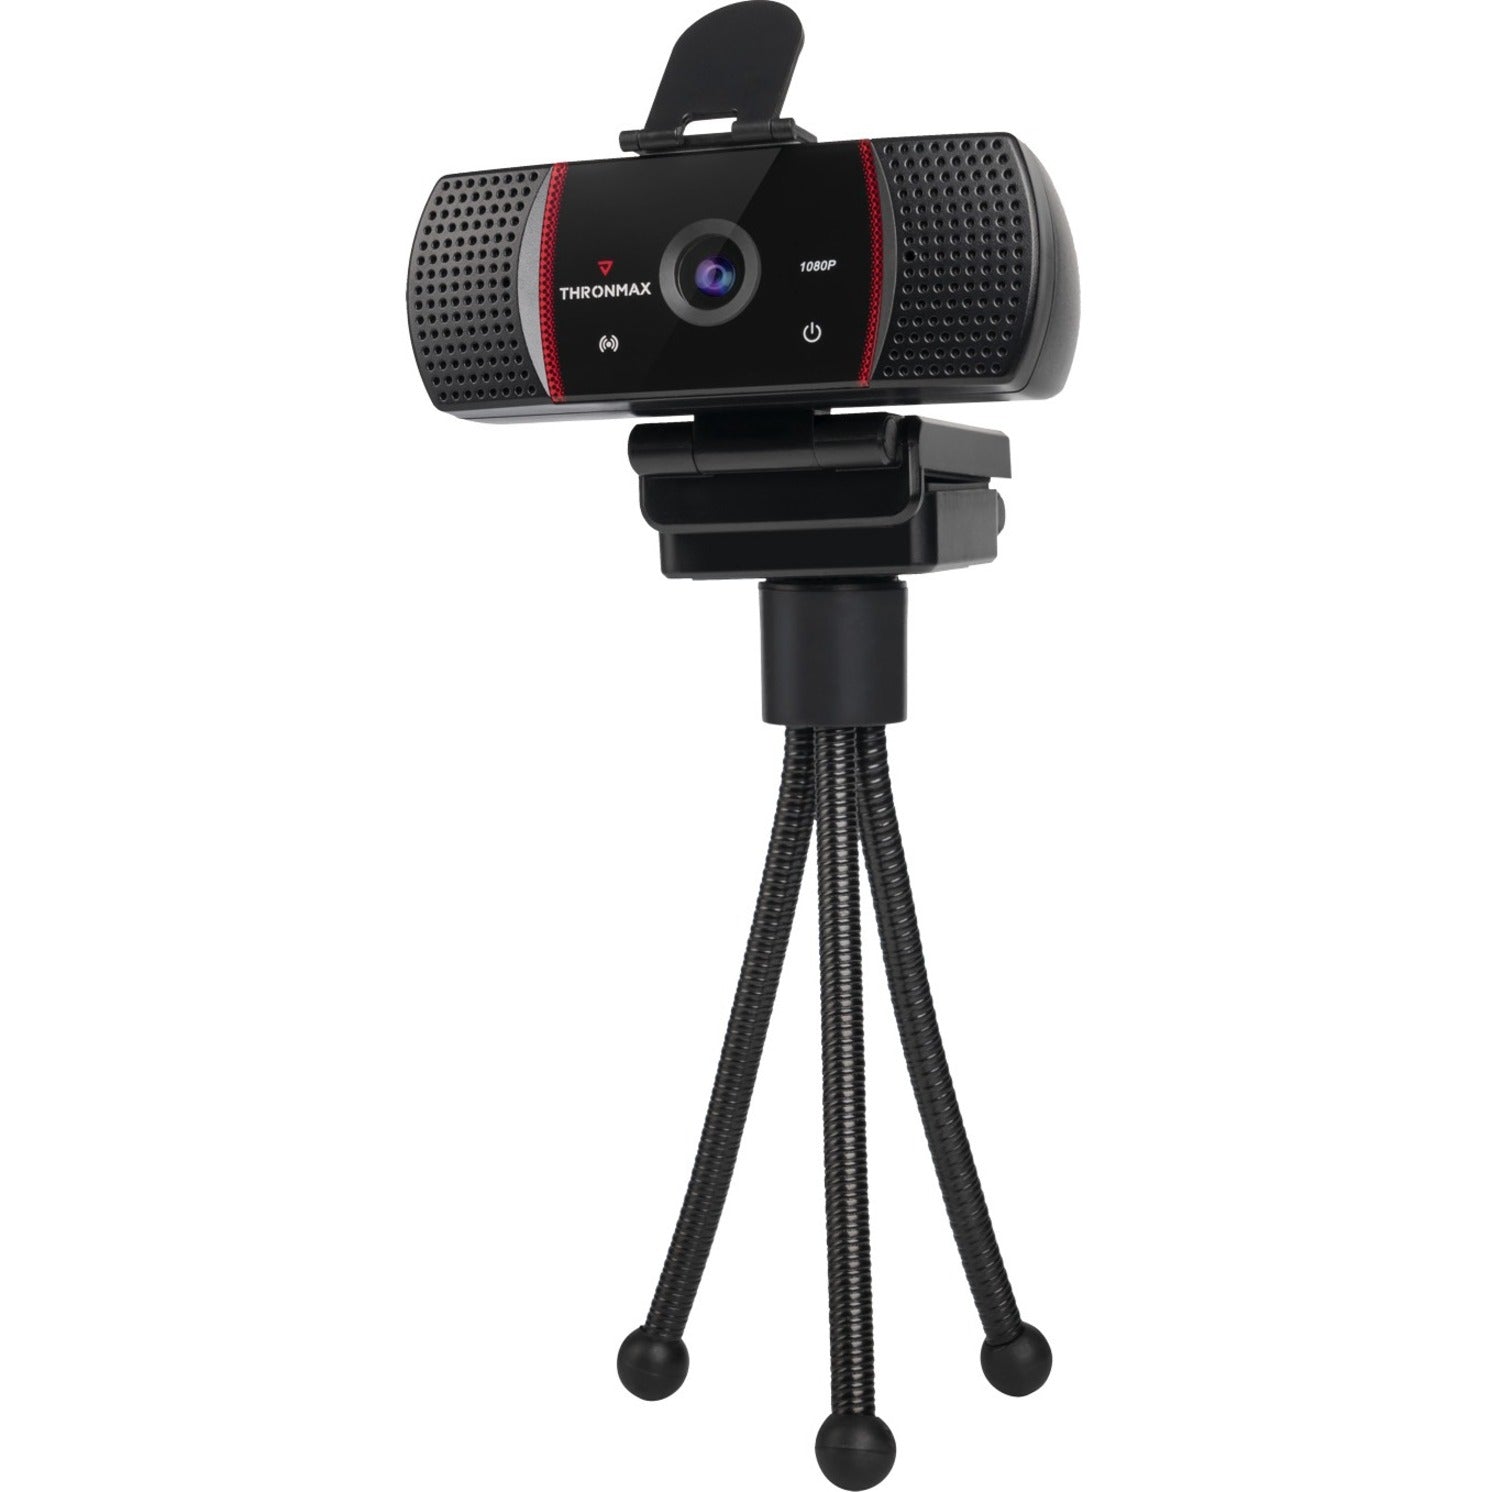 Thronmax X1 Stream G0 1080P Webcam, USB 2.0, Built-in Microphone, Tripod Included